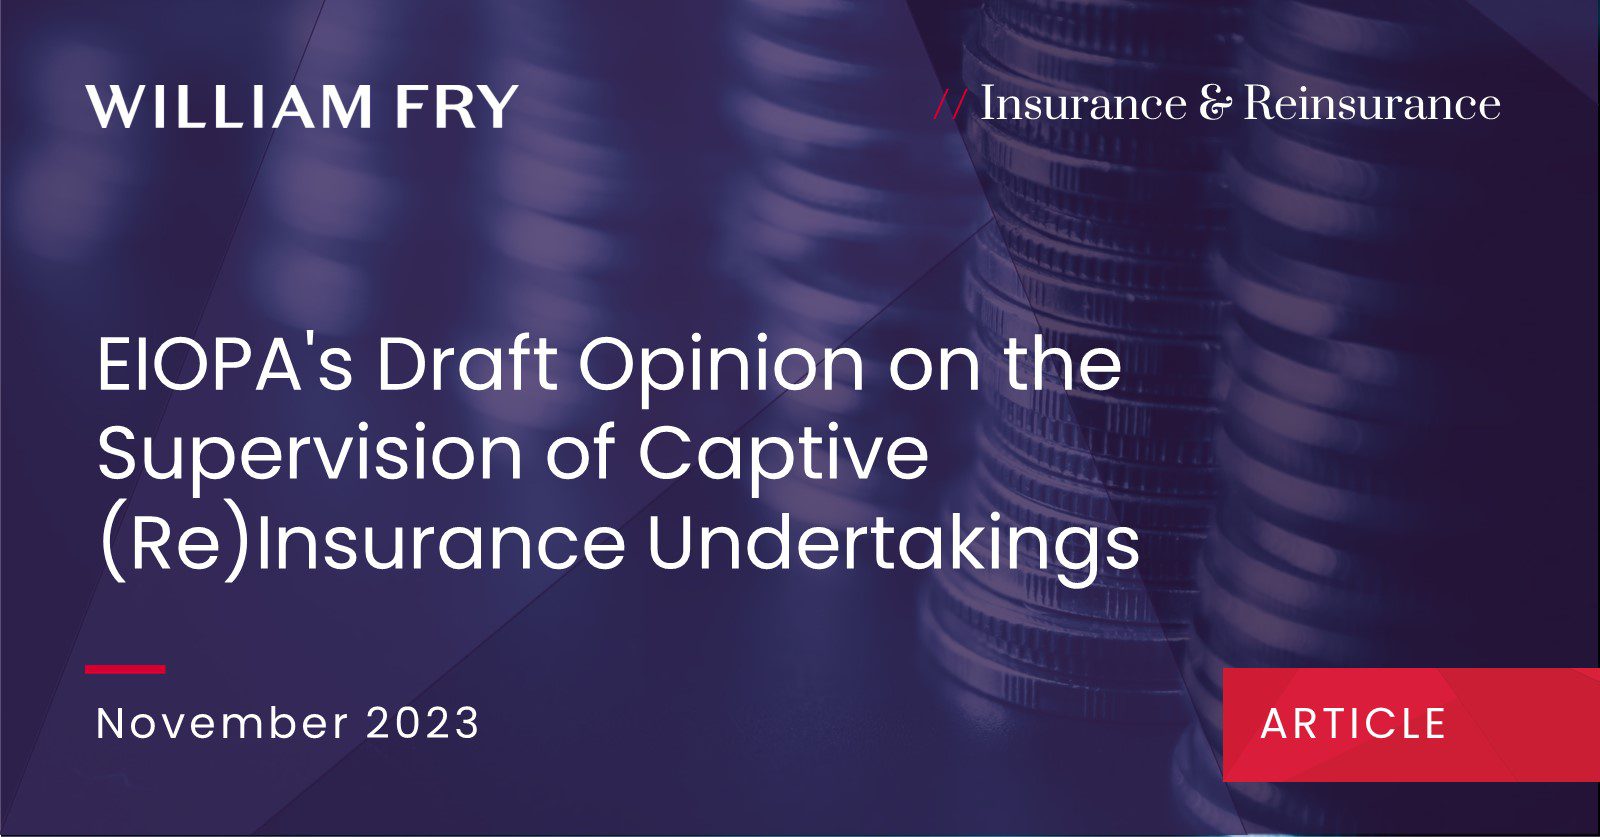 EIOPA's Draft Opinion on the Supervision of Captive (Re)insurance Undertakings